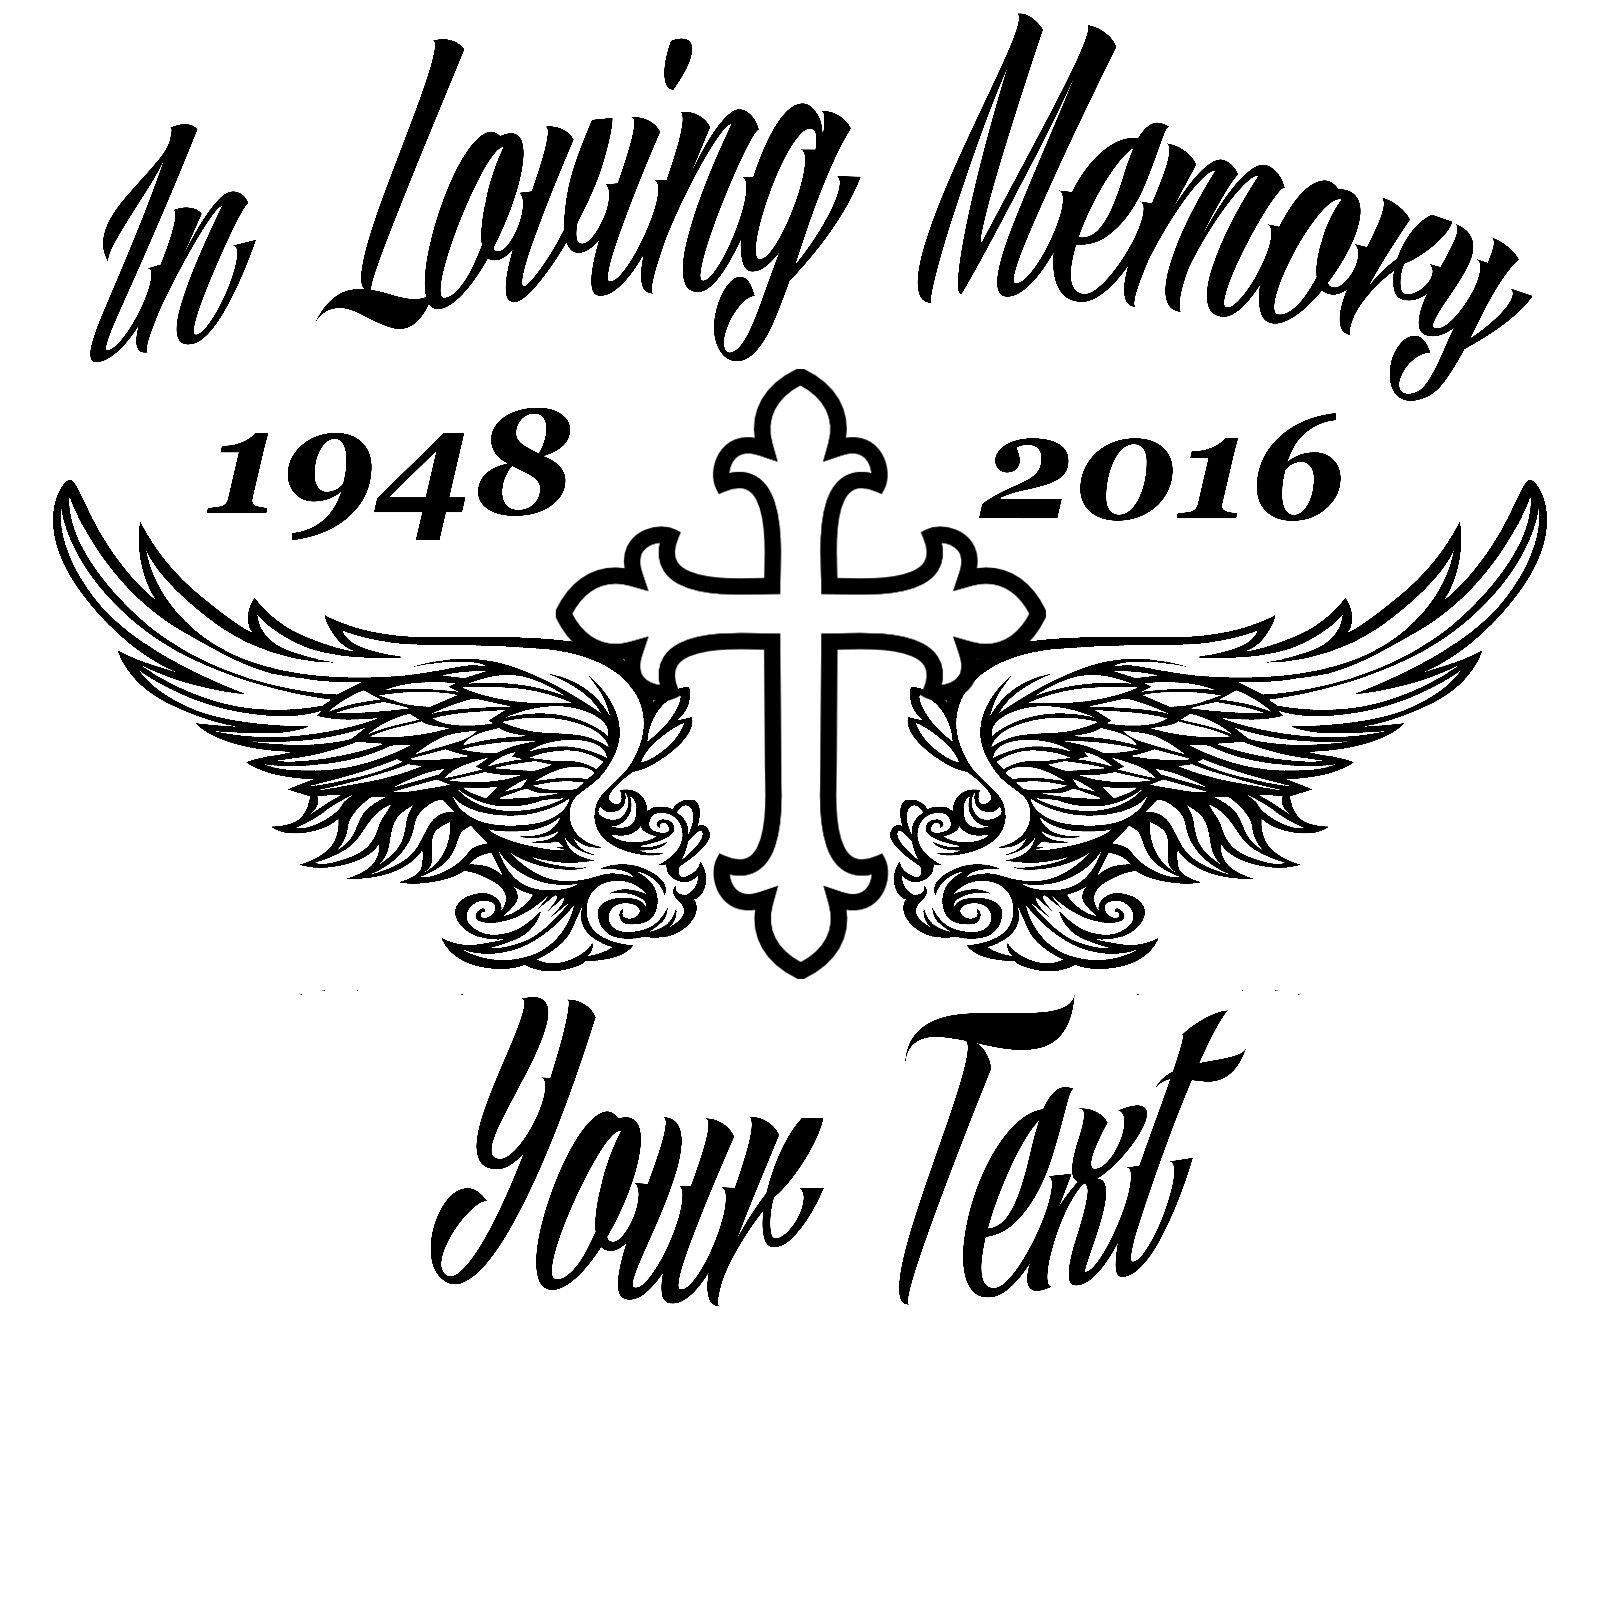 in loving memory picture car sticker